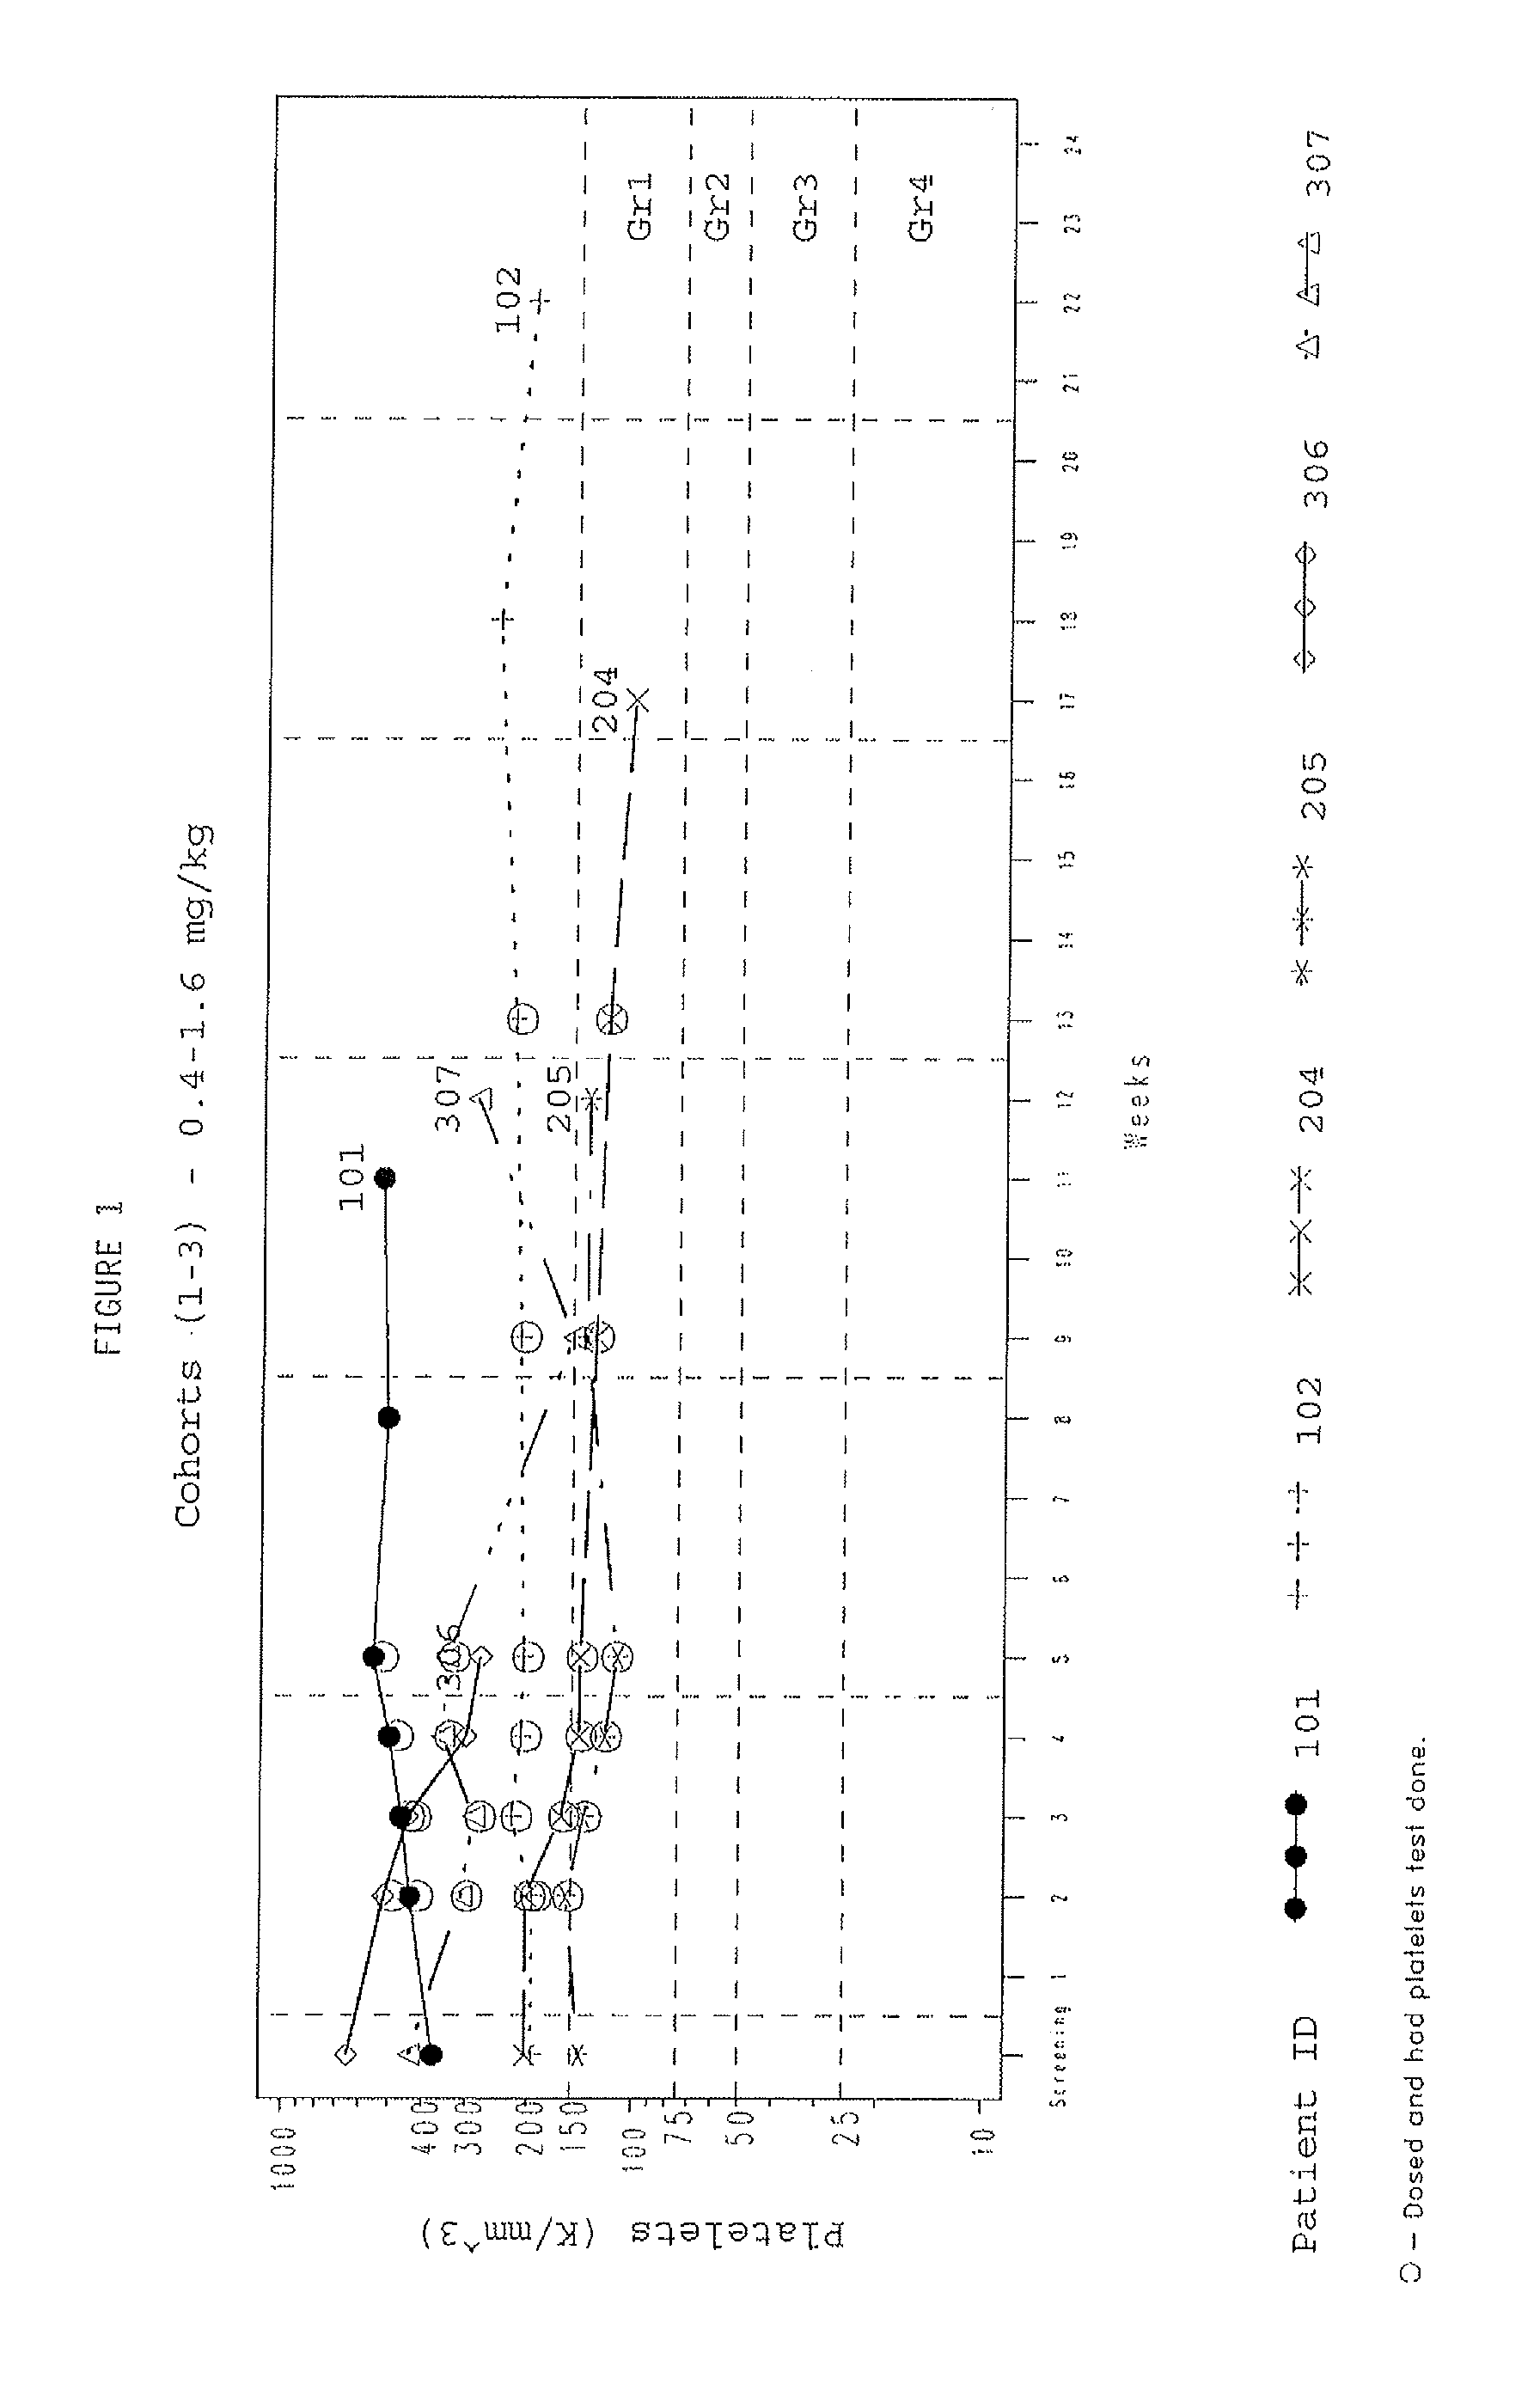 Method for Identification of Sensitivity of a Patient to Telomerase Inhibition Therapy